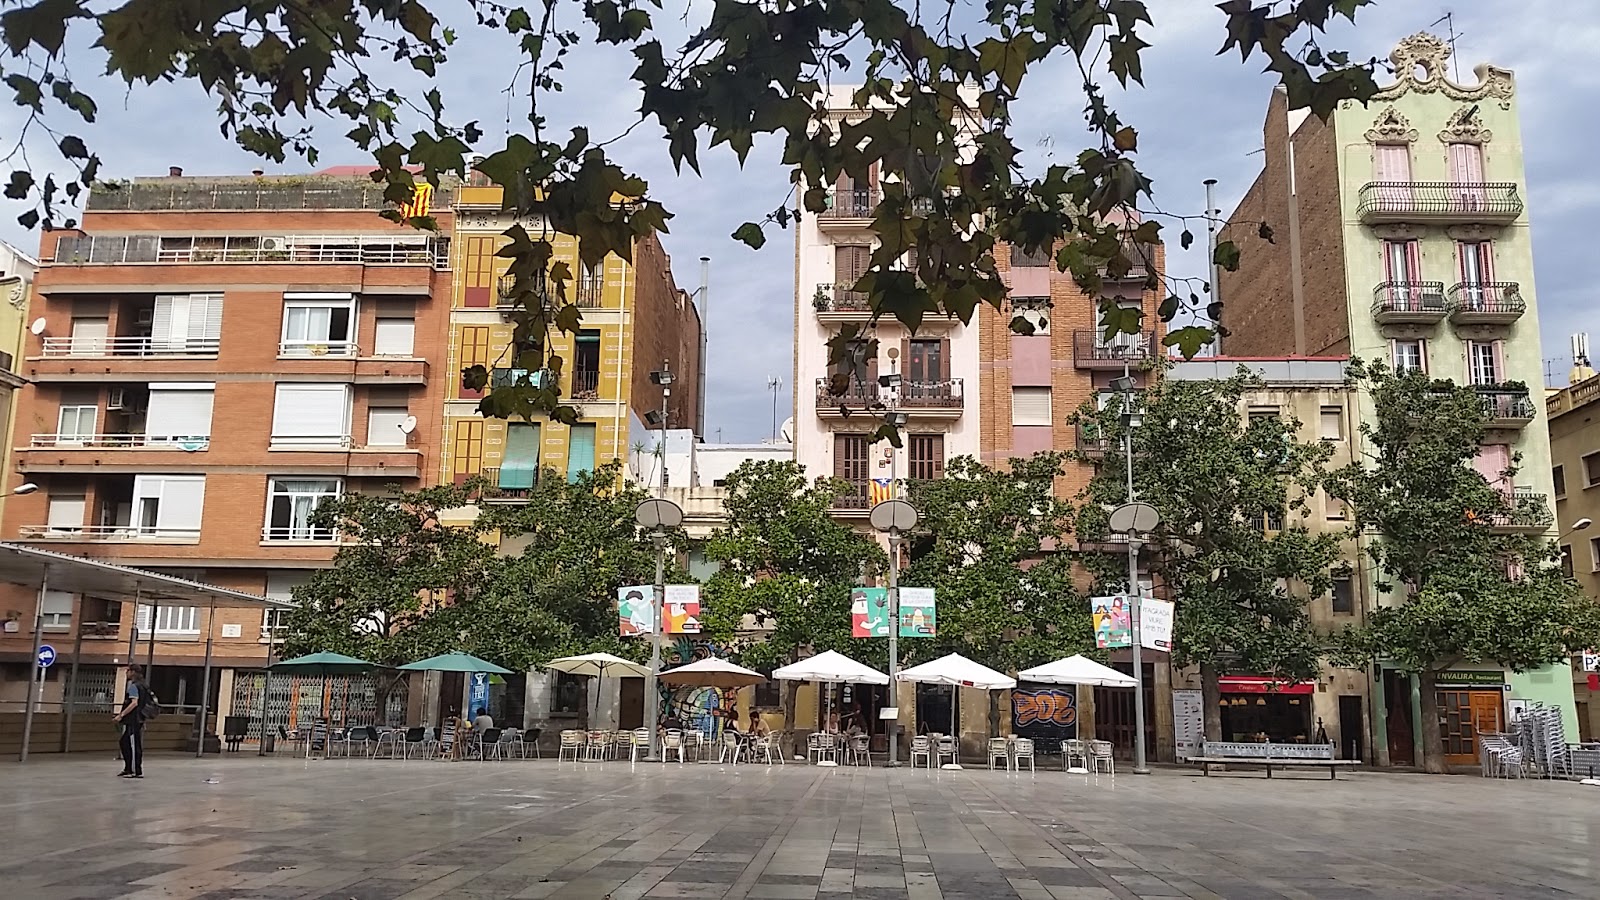 The Best Of The Gracia Neighborhood For Your Audiovisual Project